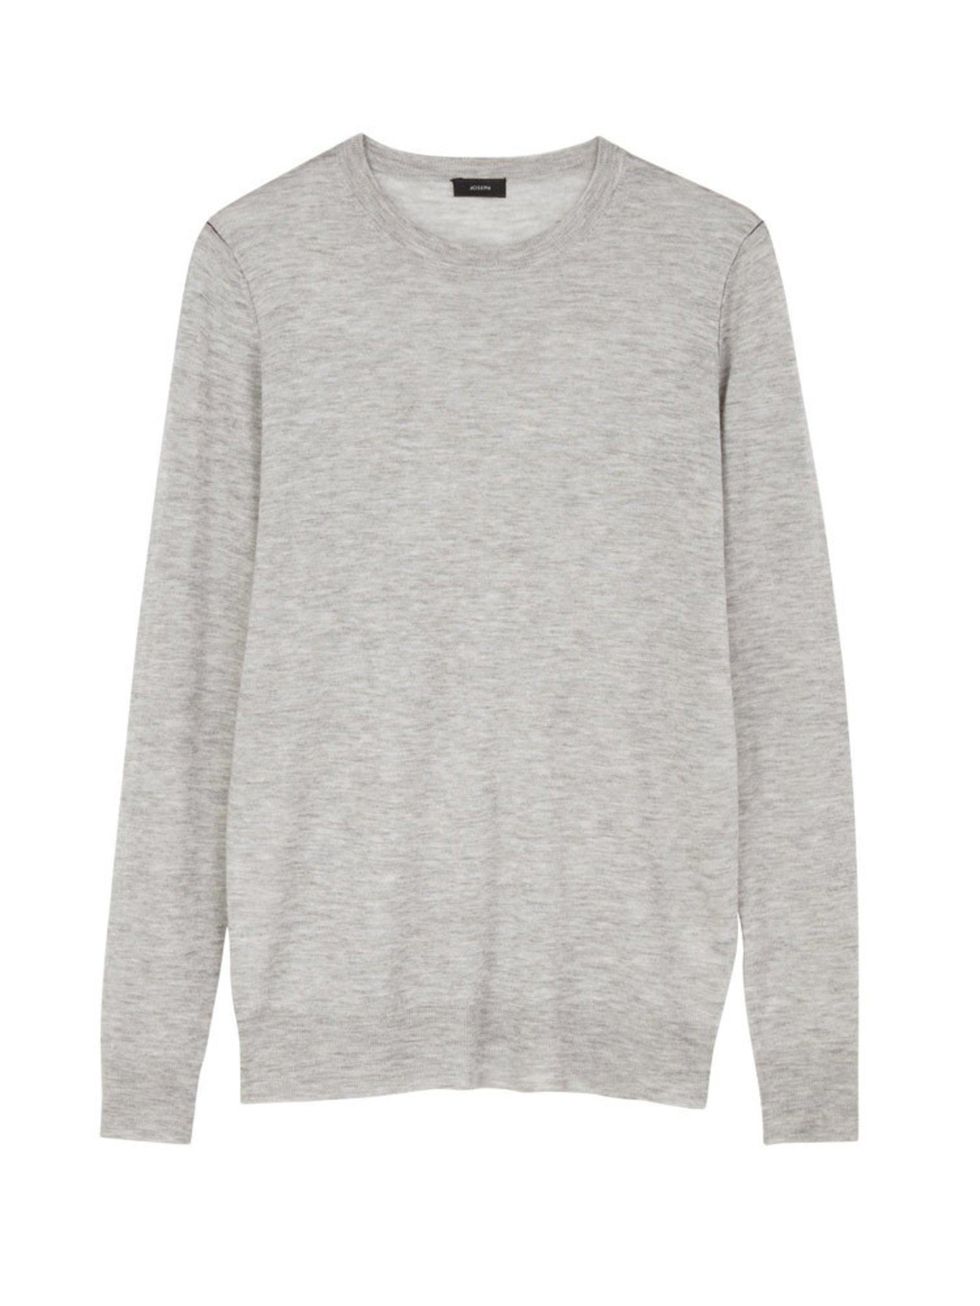 <p>Jospeh Cashmere Jumper, £215 at <a href="http://www.veryexclusive.co.uk/joseph-cashair-basic-sweater-ndash-grey/1461002052.prd" target="_blank">veryexclusive.co.uk</a></p>

<p>Day: cashmere is an absolute wardrobe must to elevate those day time looks i